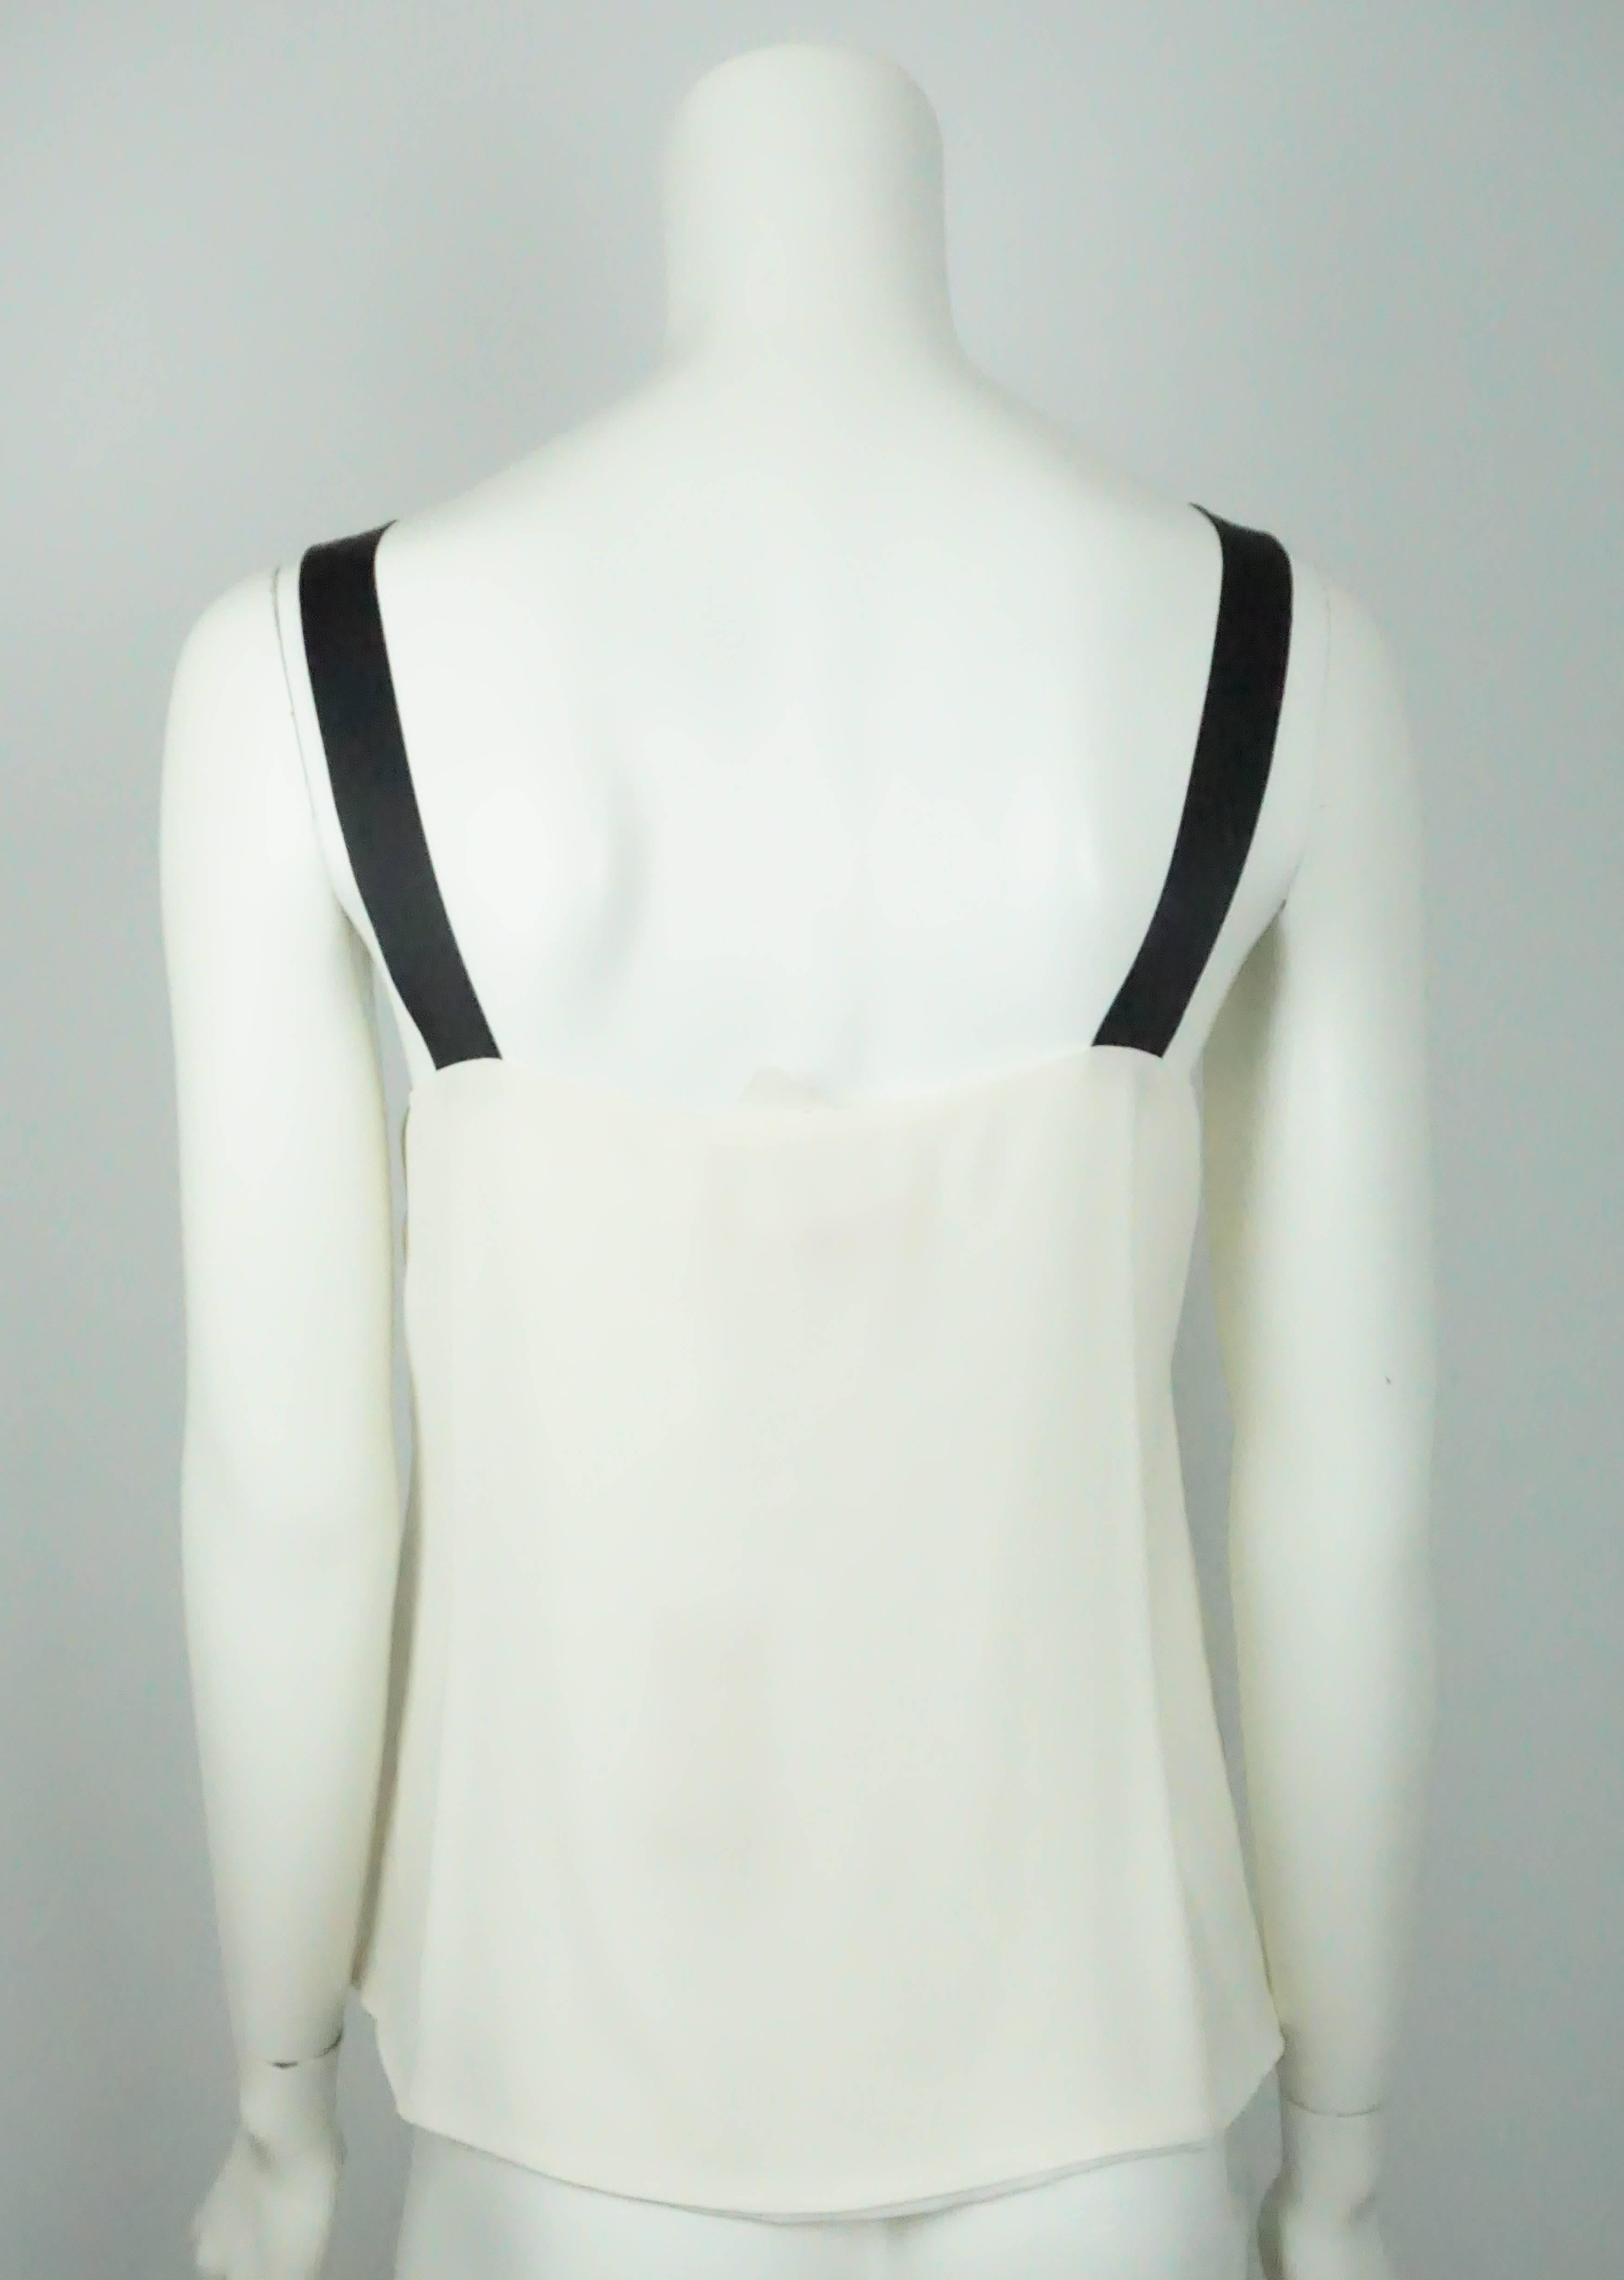 Michael Kors Ivory and Black Silk Camisole w/ Ribbon Straps - NWT - 8 In Excellent Condition For Sale In West Palm Beach, FL